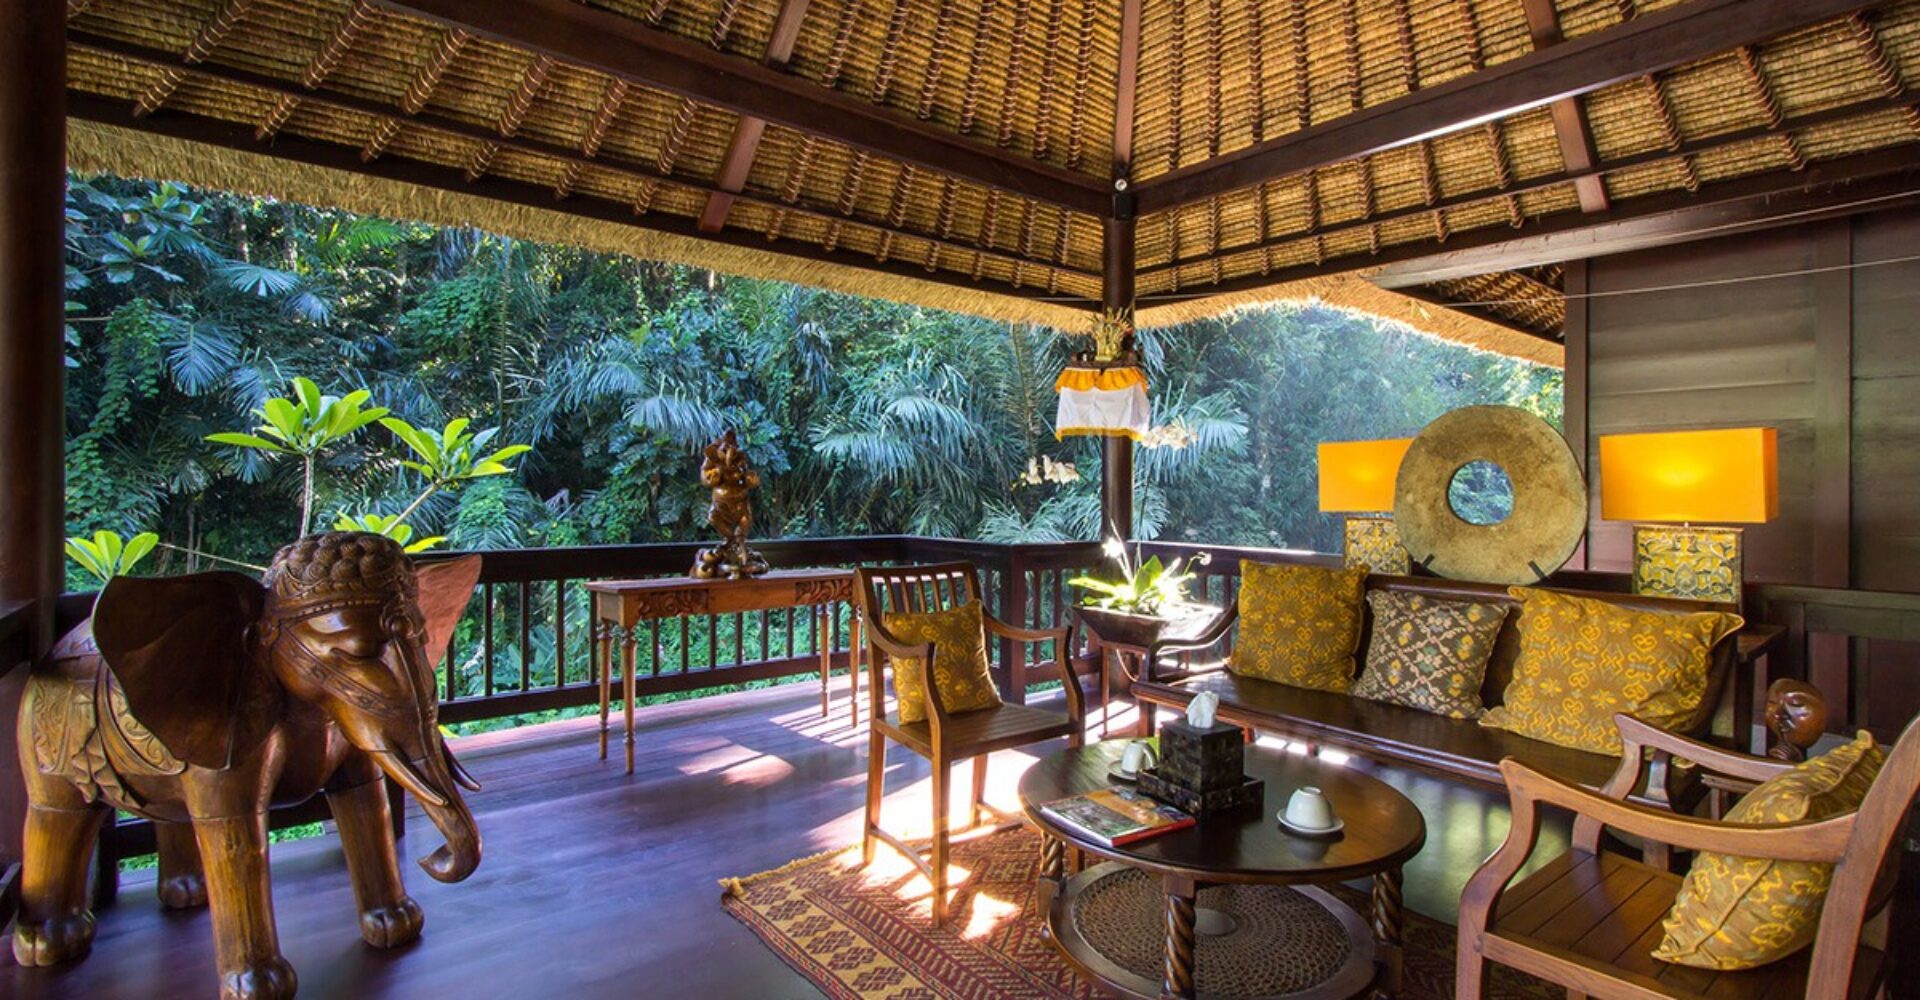 One of the seating areas at Sukhavati Ayurvedic Wellness Retreat in Bali that looks out onto rainforest.